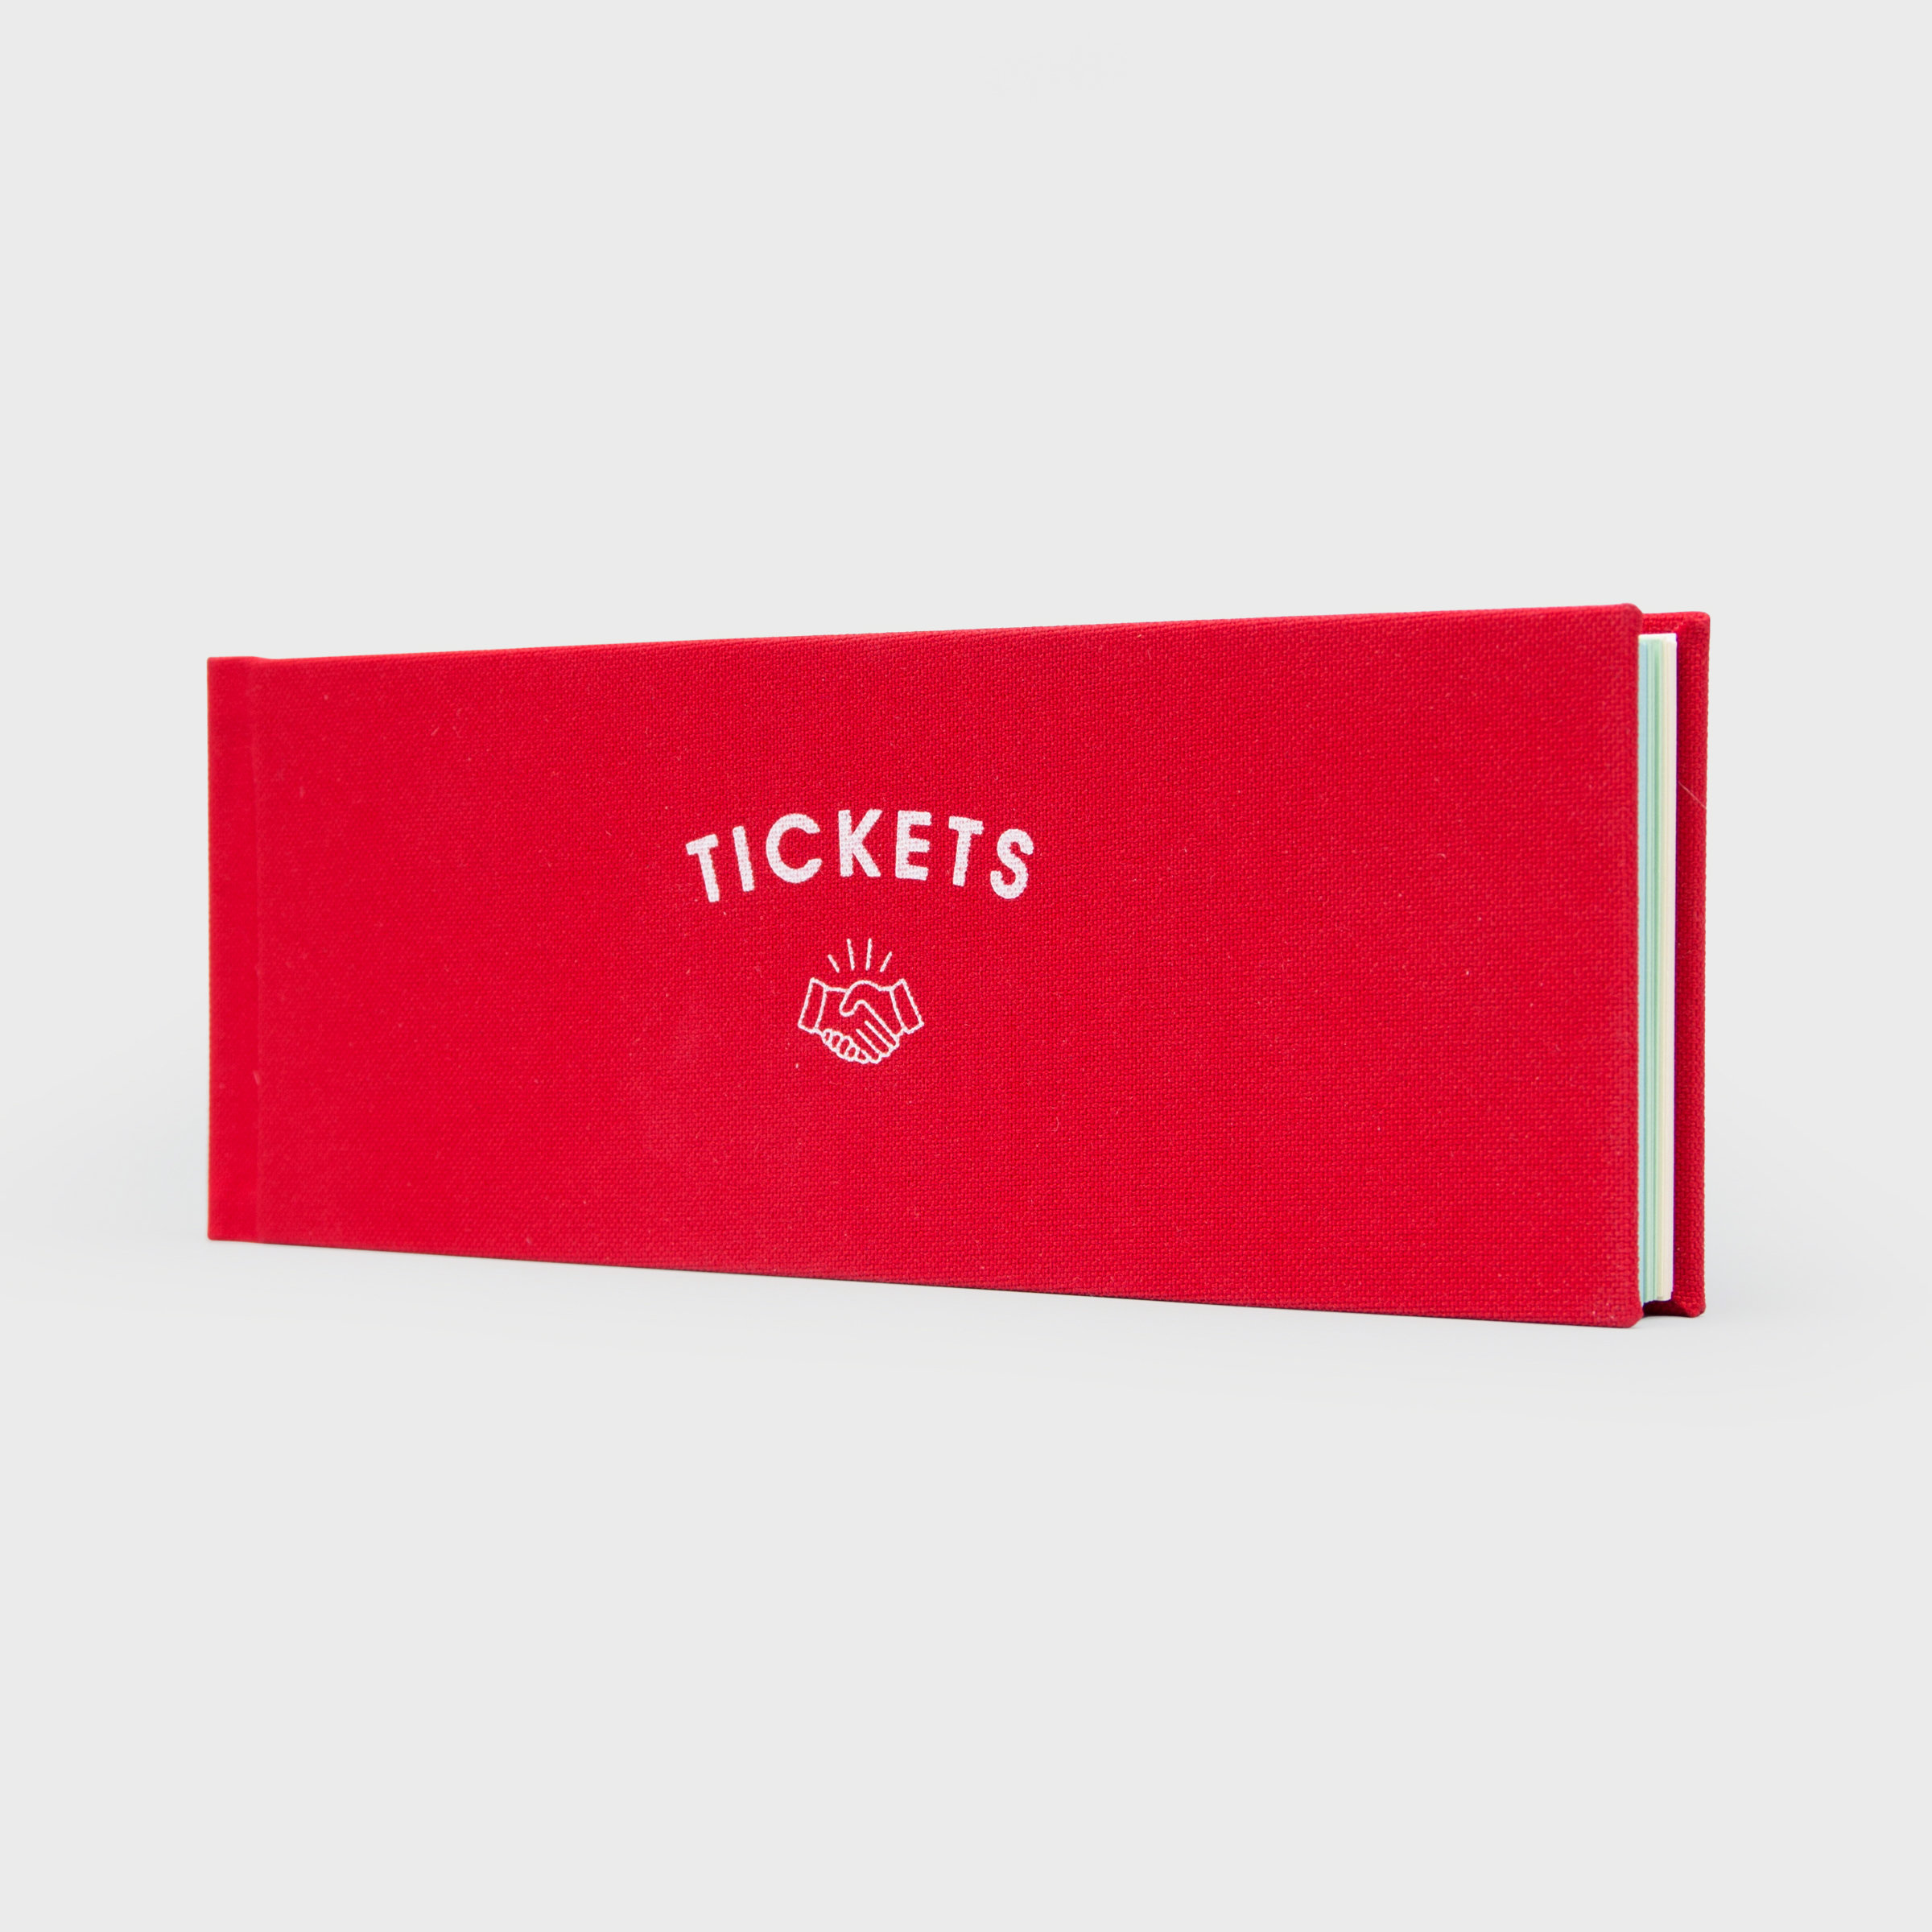 Red book of blank tickets